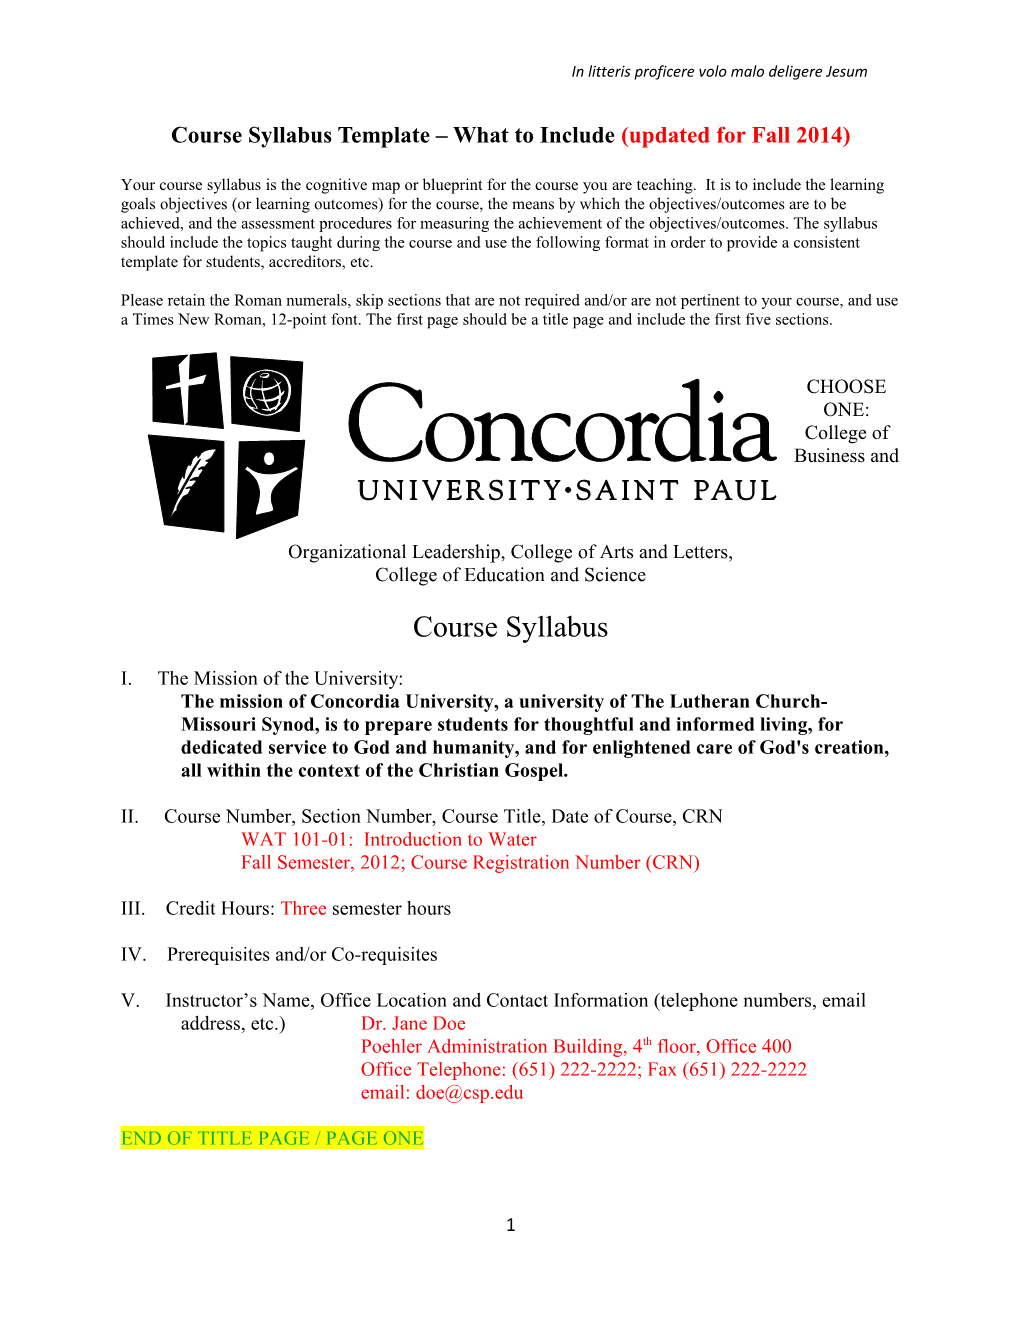 Course Syllabus Template What to Include(Updated for Fall 2014)